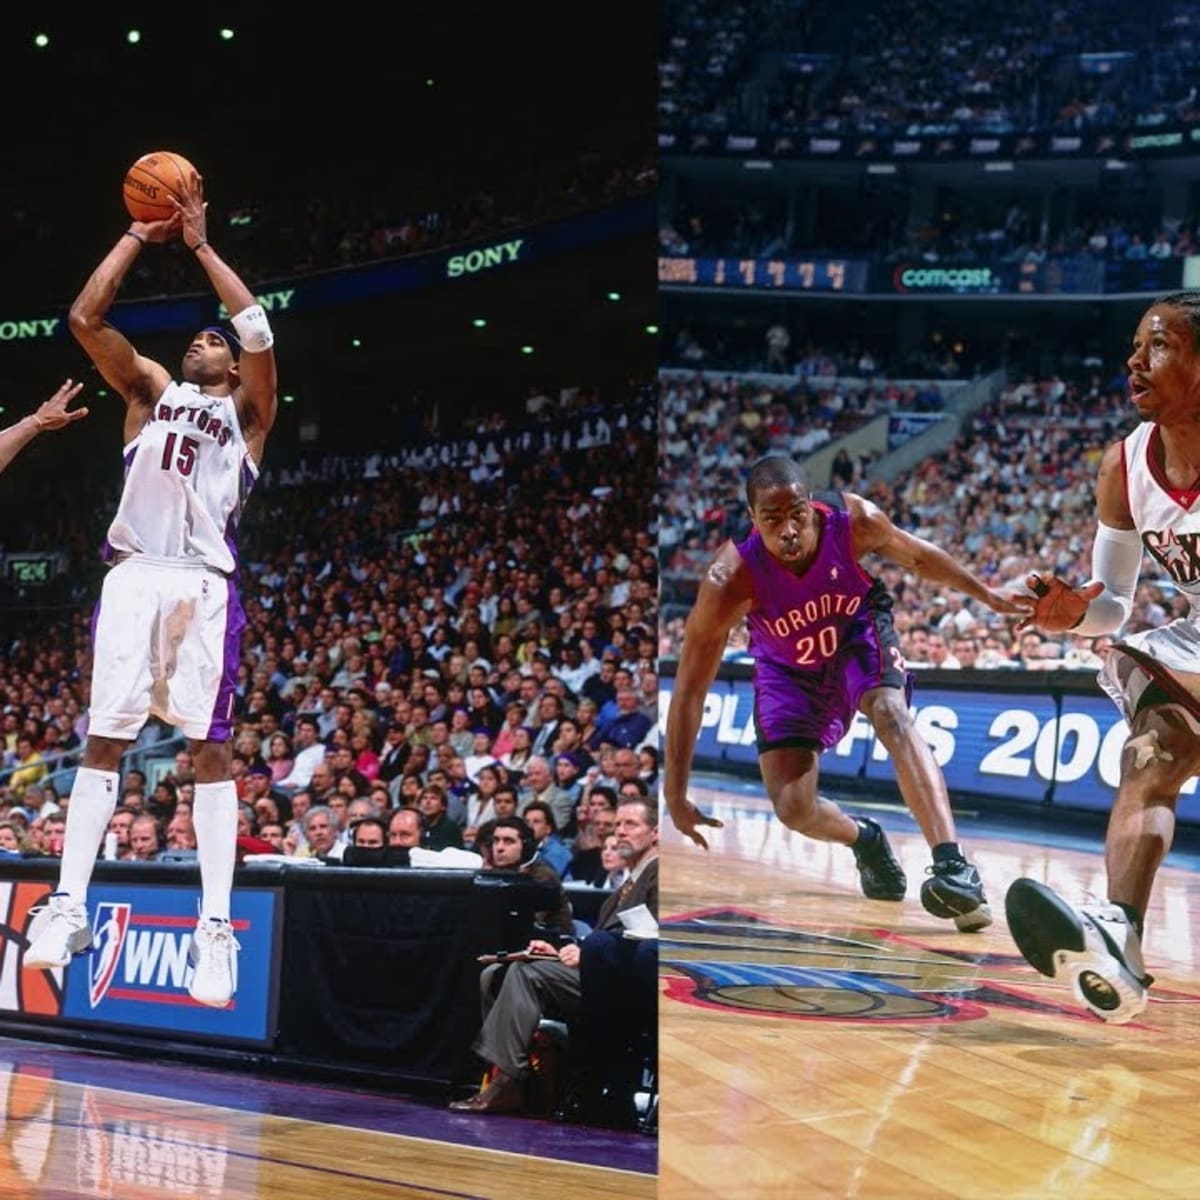 Allen Iverson Said Vince Carter Was A Top 5 Dancer In The Whole World:  Whatever The Young Kids Can Do, Vince Can Do It. - Fadeaway World